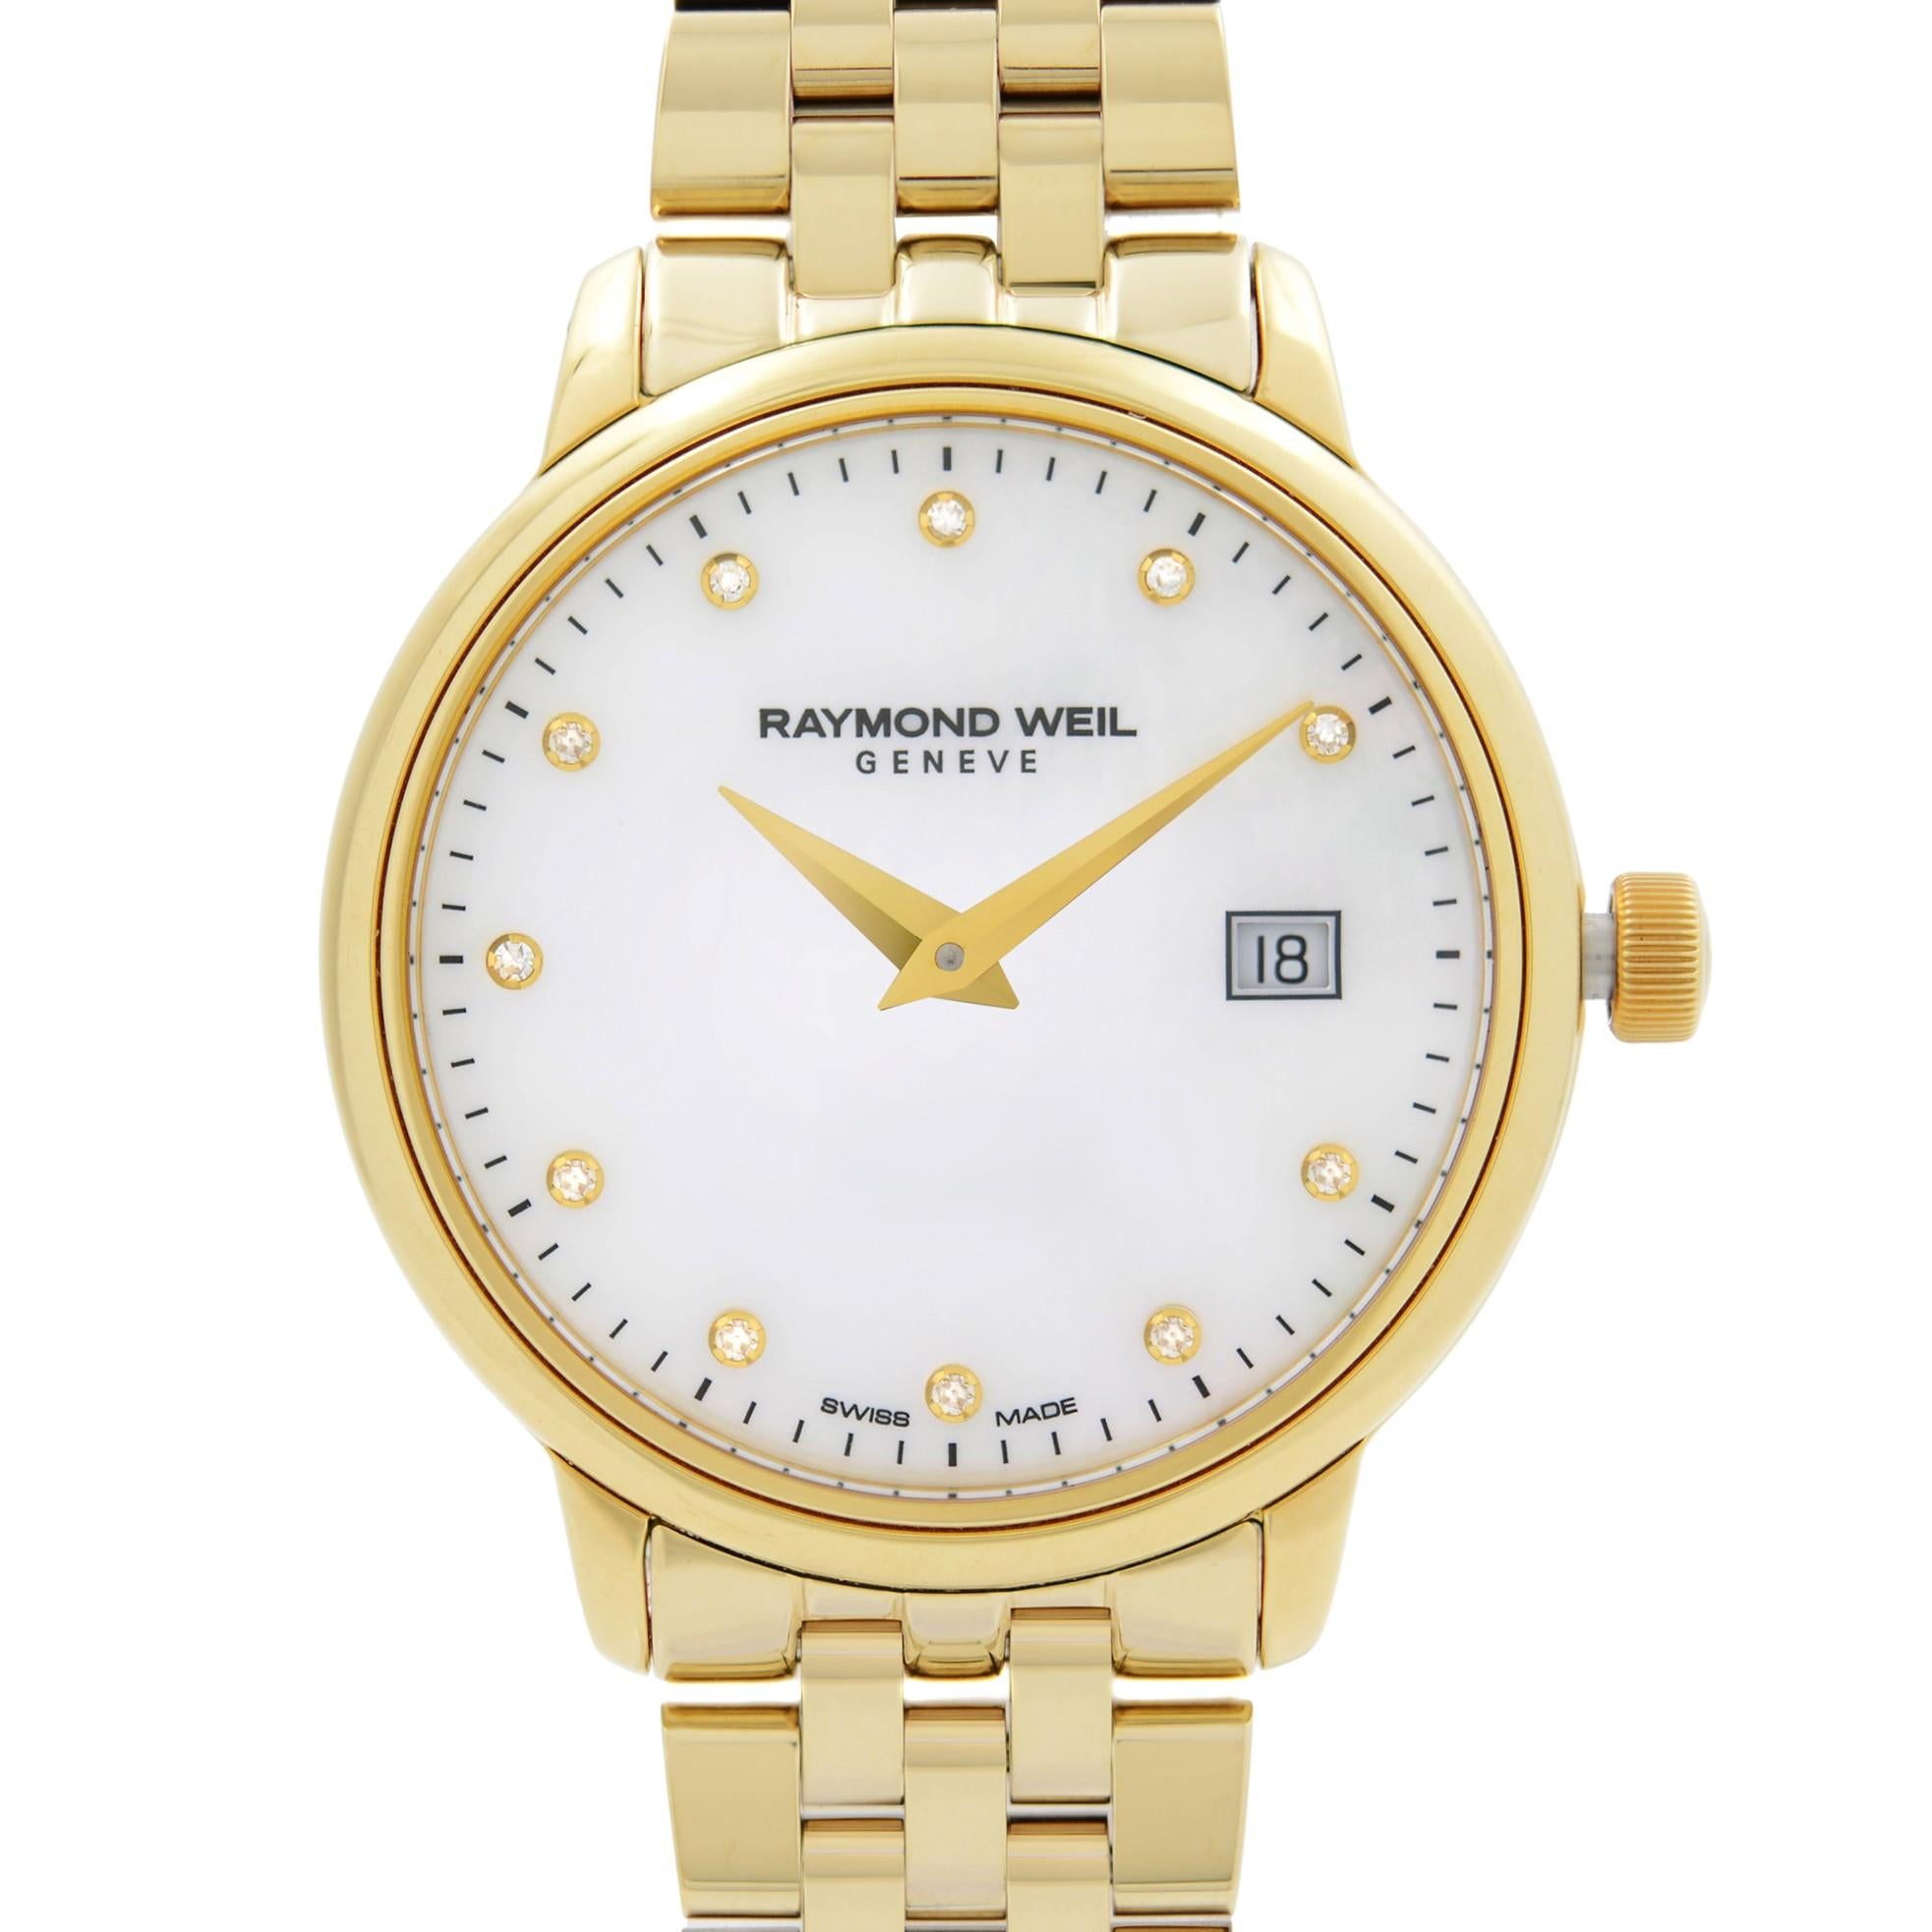 Pre-owned Raymond Weil Toccata 29mm Steel Mother of Pearl Diamond Date Dial Quartz Ladies Dress Watch. The watch has minor scratches. Comes with Chronostore Presentation Box and Authenticity Card. 1-year warranty provided by Chronostore is included.